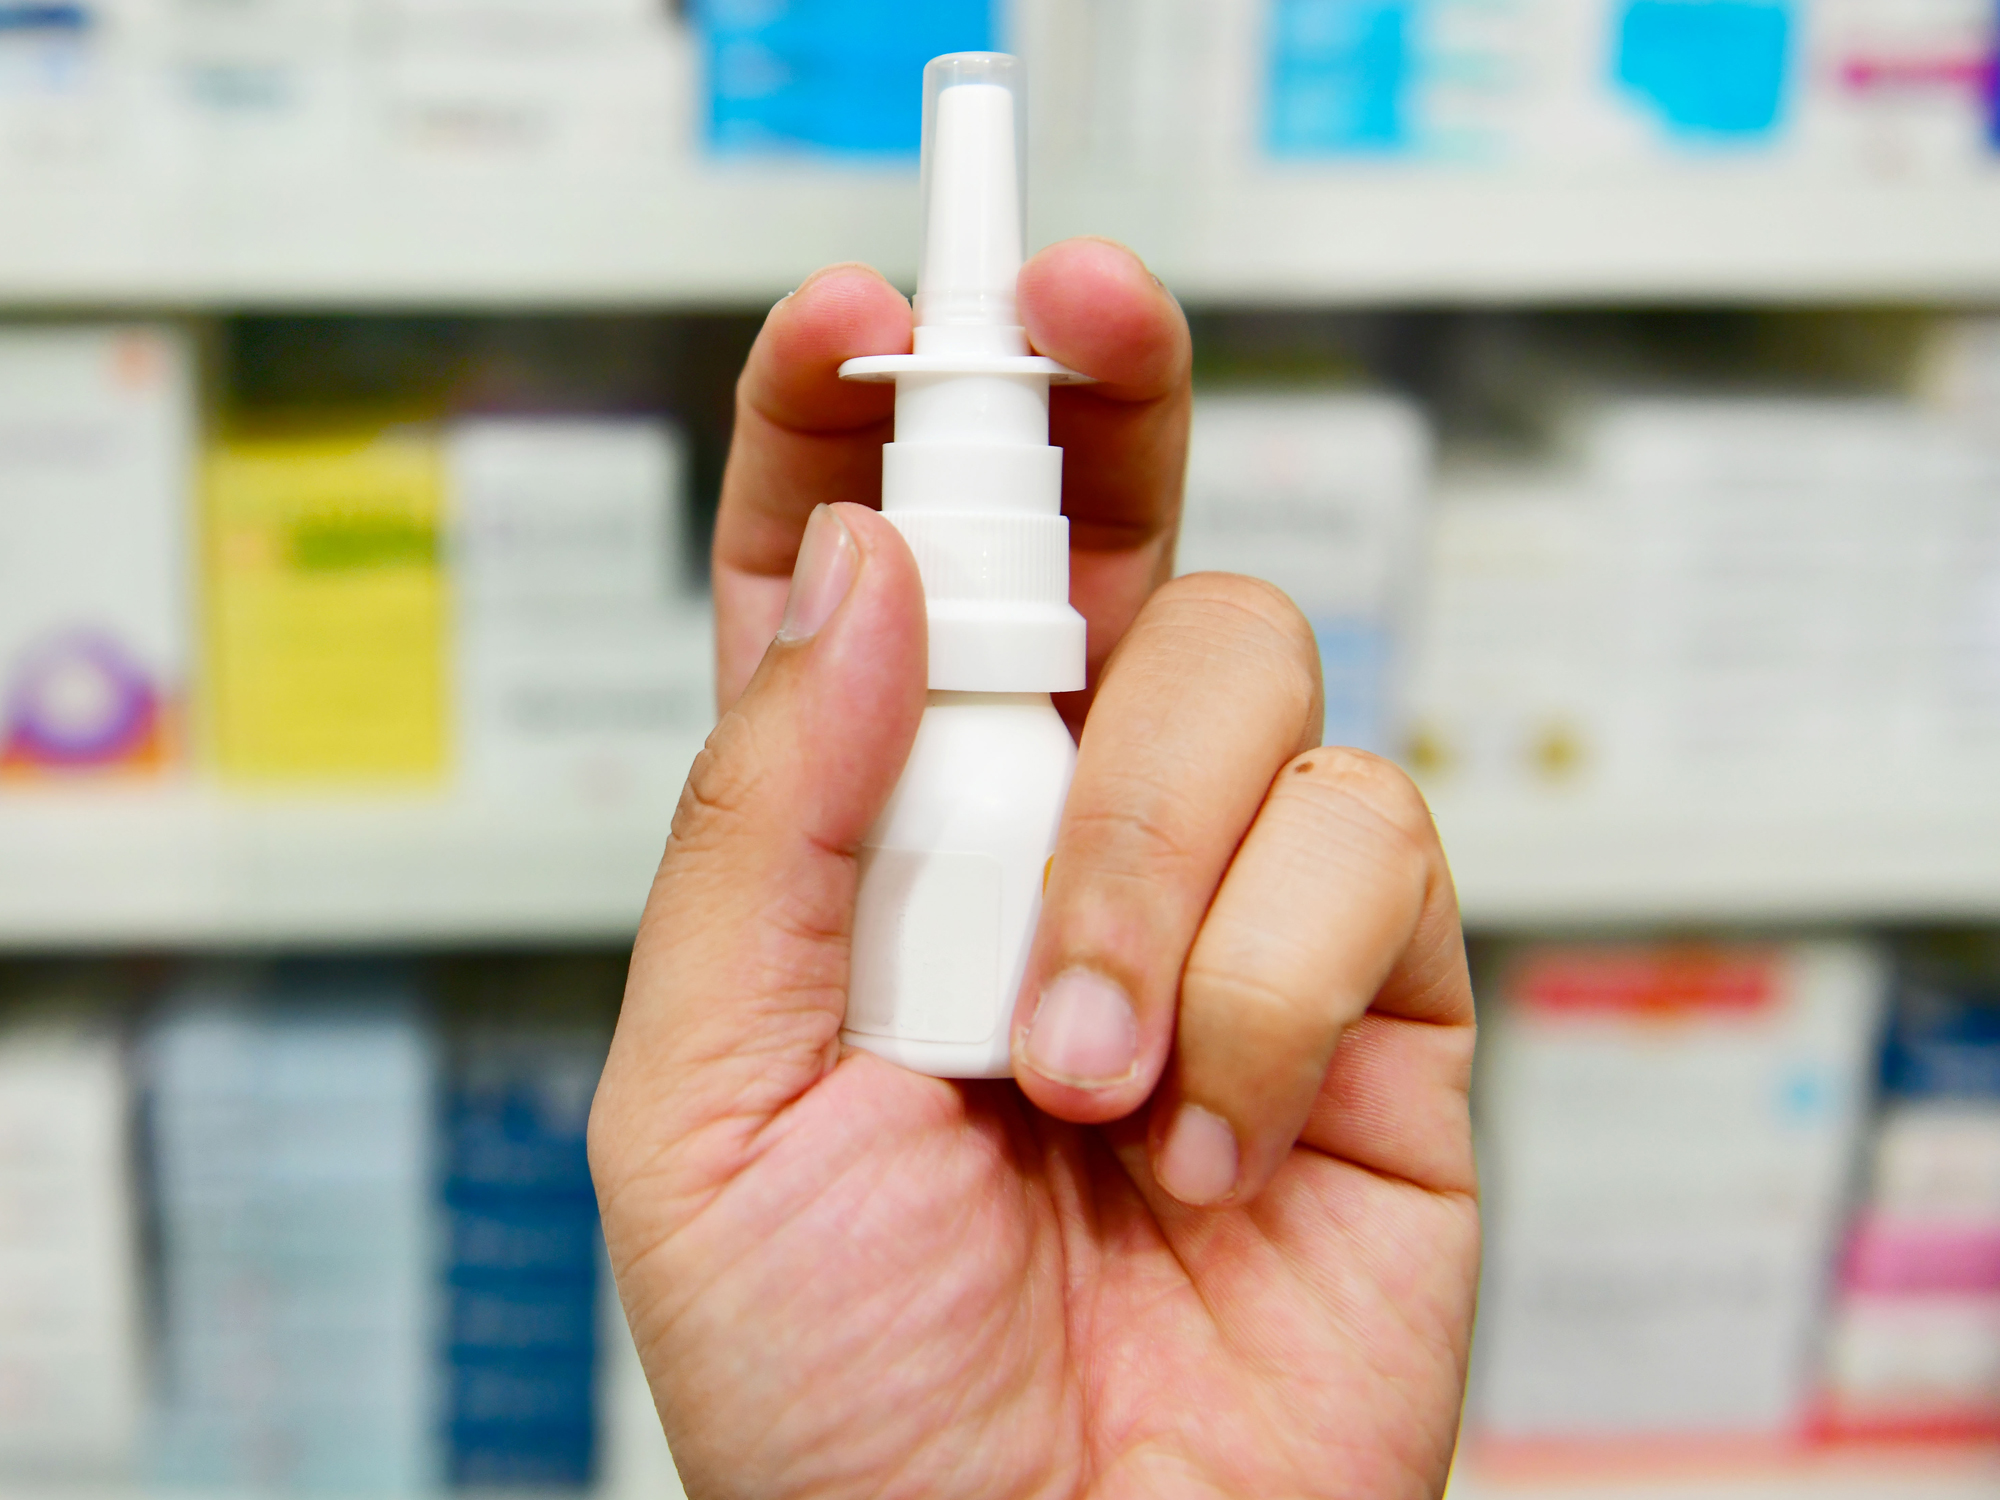 Can a nasal spray treat depression and prevent suicide?